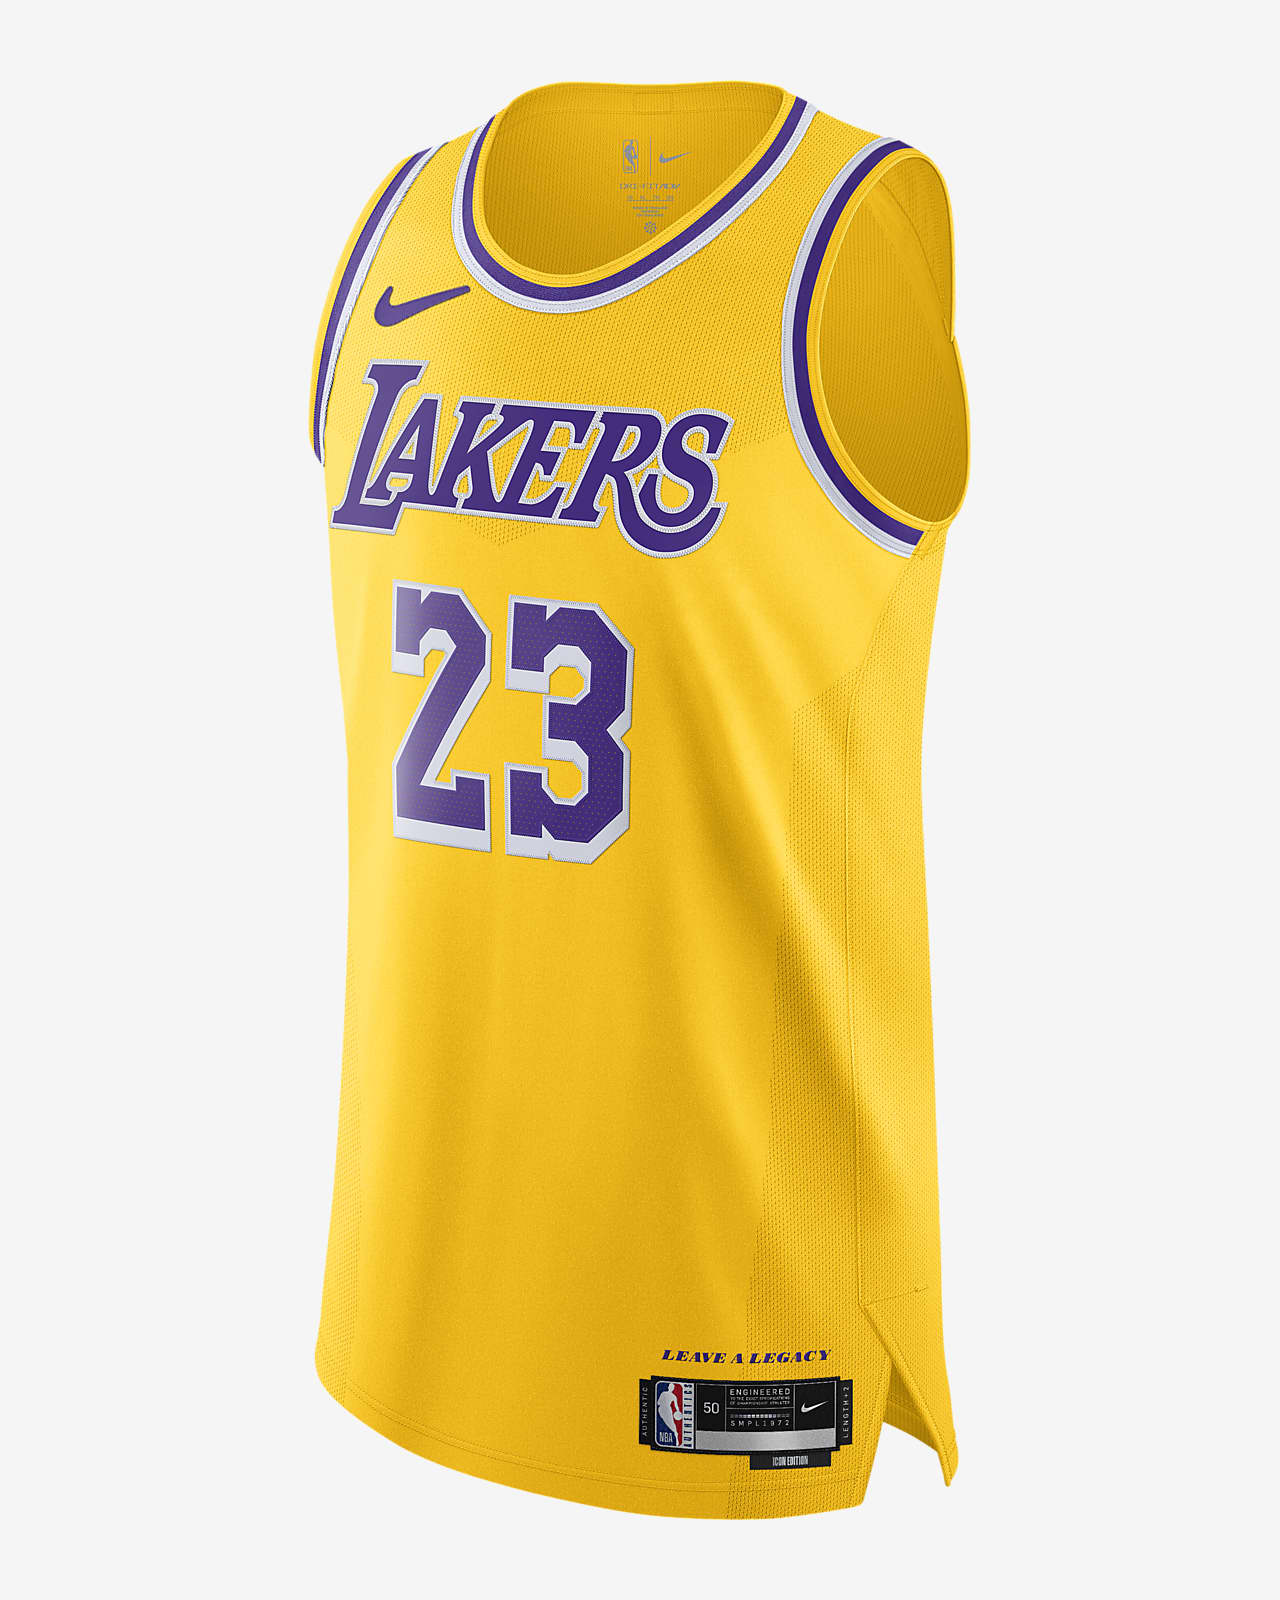 nike nba authentic jersey